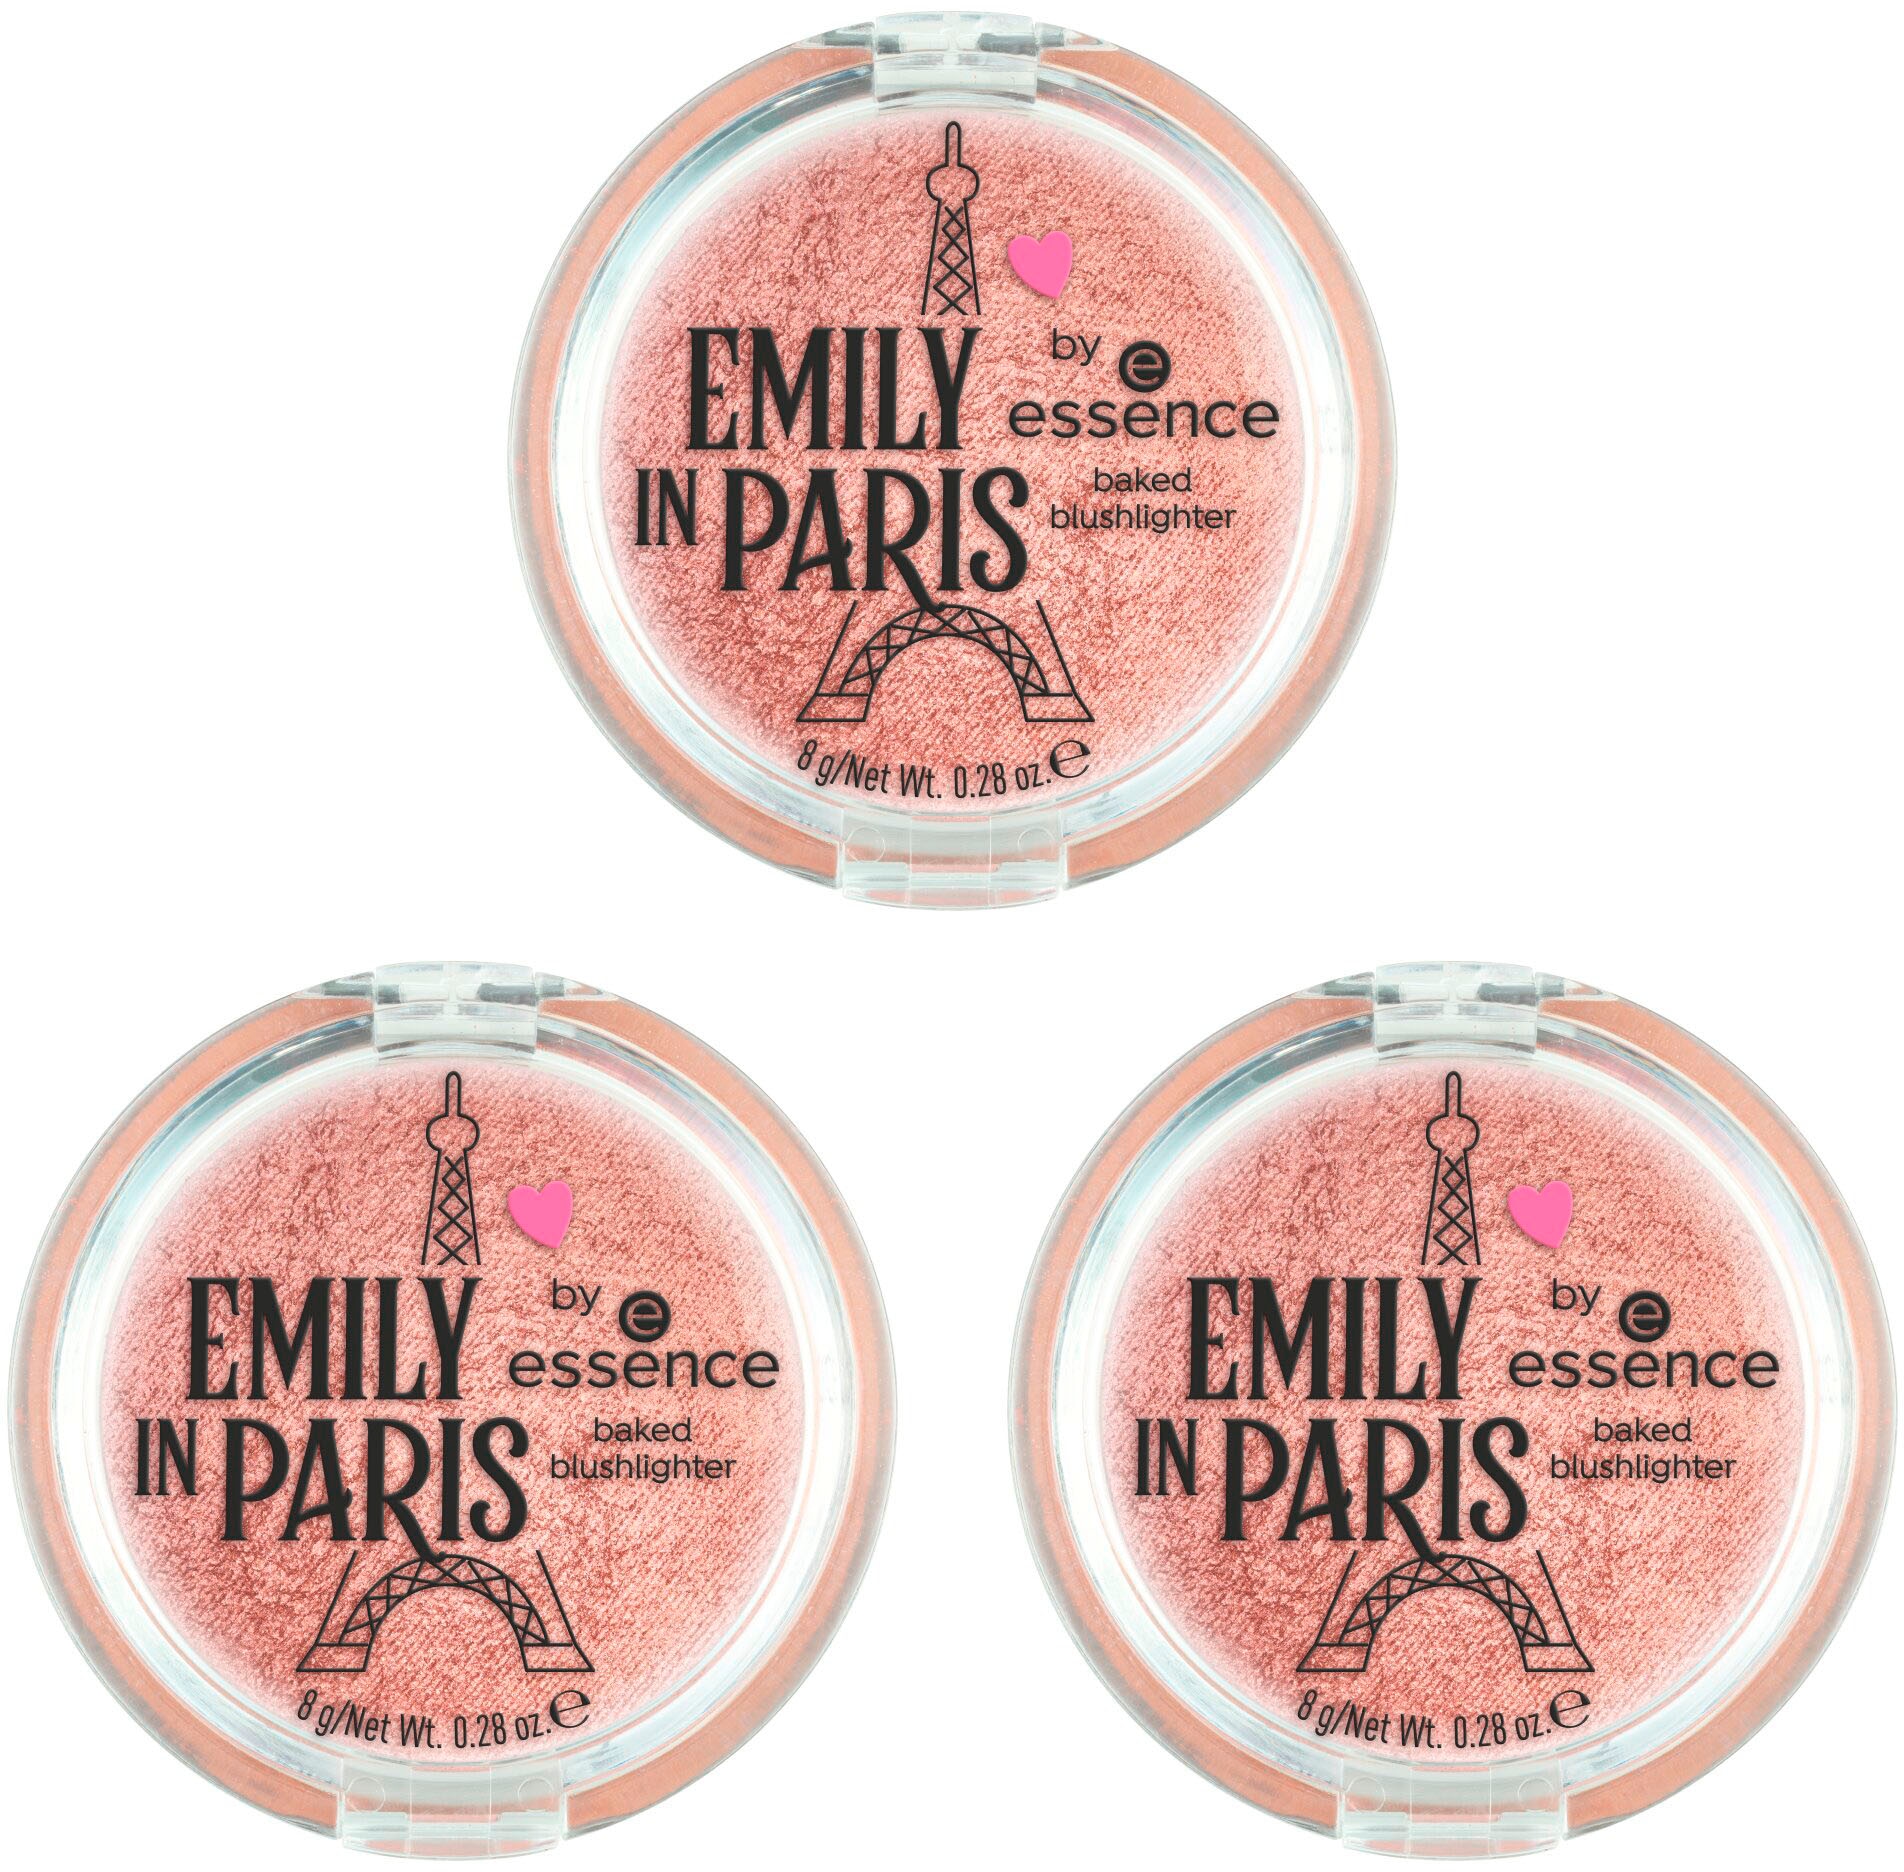 Essence Rouge »EMILY IN PARIS by baked online blushlighter« essence bei UNIVERSAL